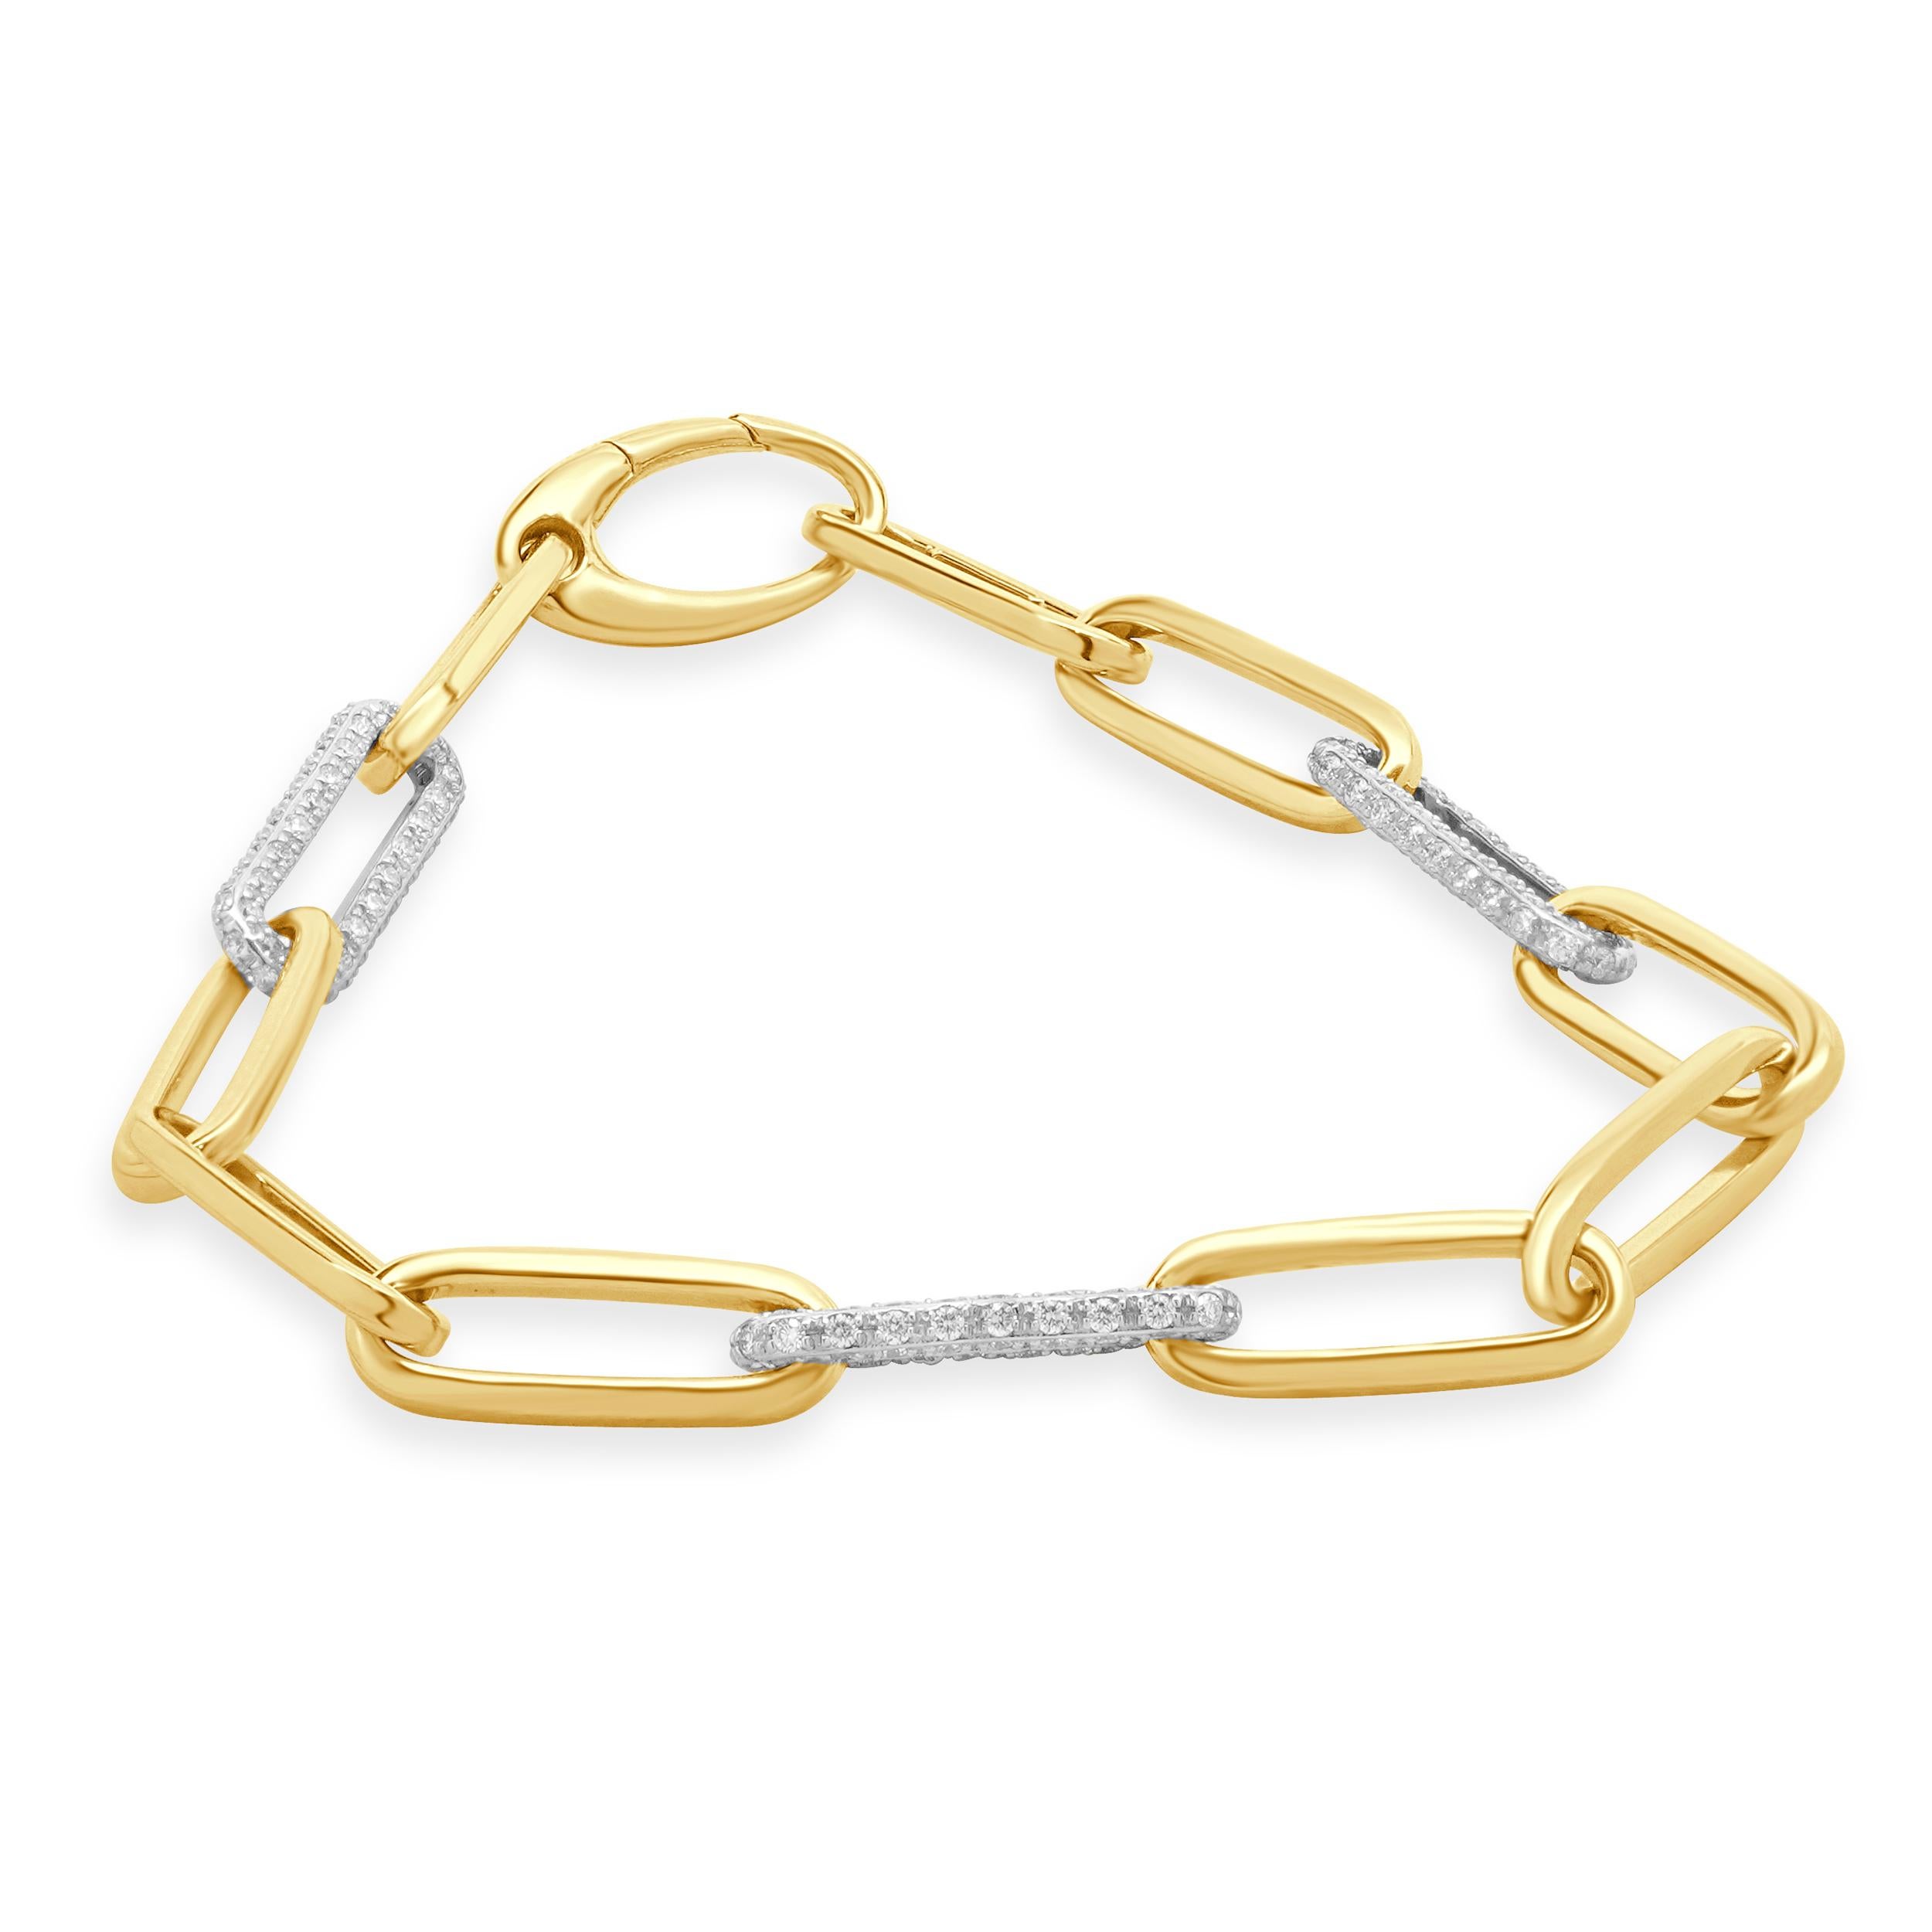 Designer: custom design
Material: 14K white & yellow gold
Diamond: 120 round brilliant cut = 1.48cttw
Color: G/H
Clarity: VS-SI1
Dimensions: bracelet will fit up to a 7-inch wrist
Weight: 9.89 grams
